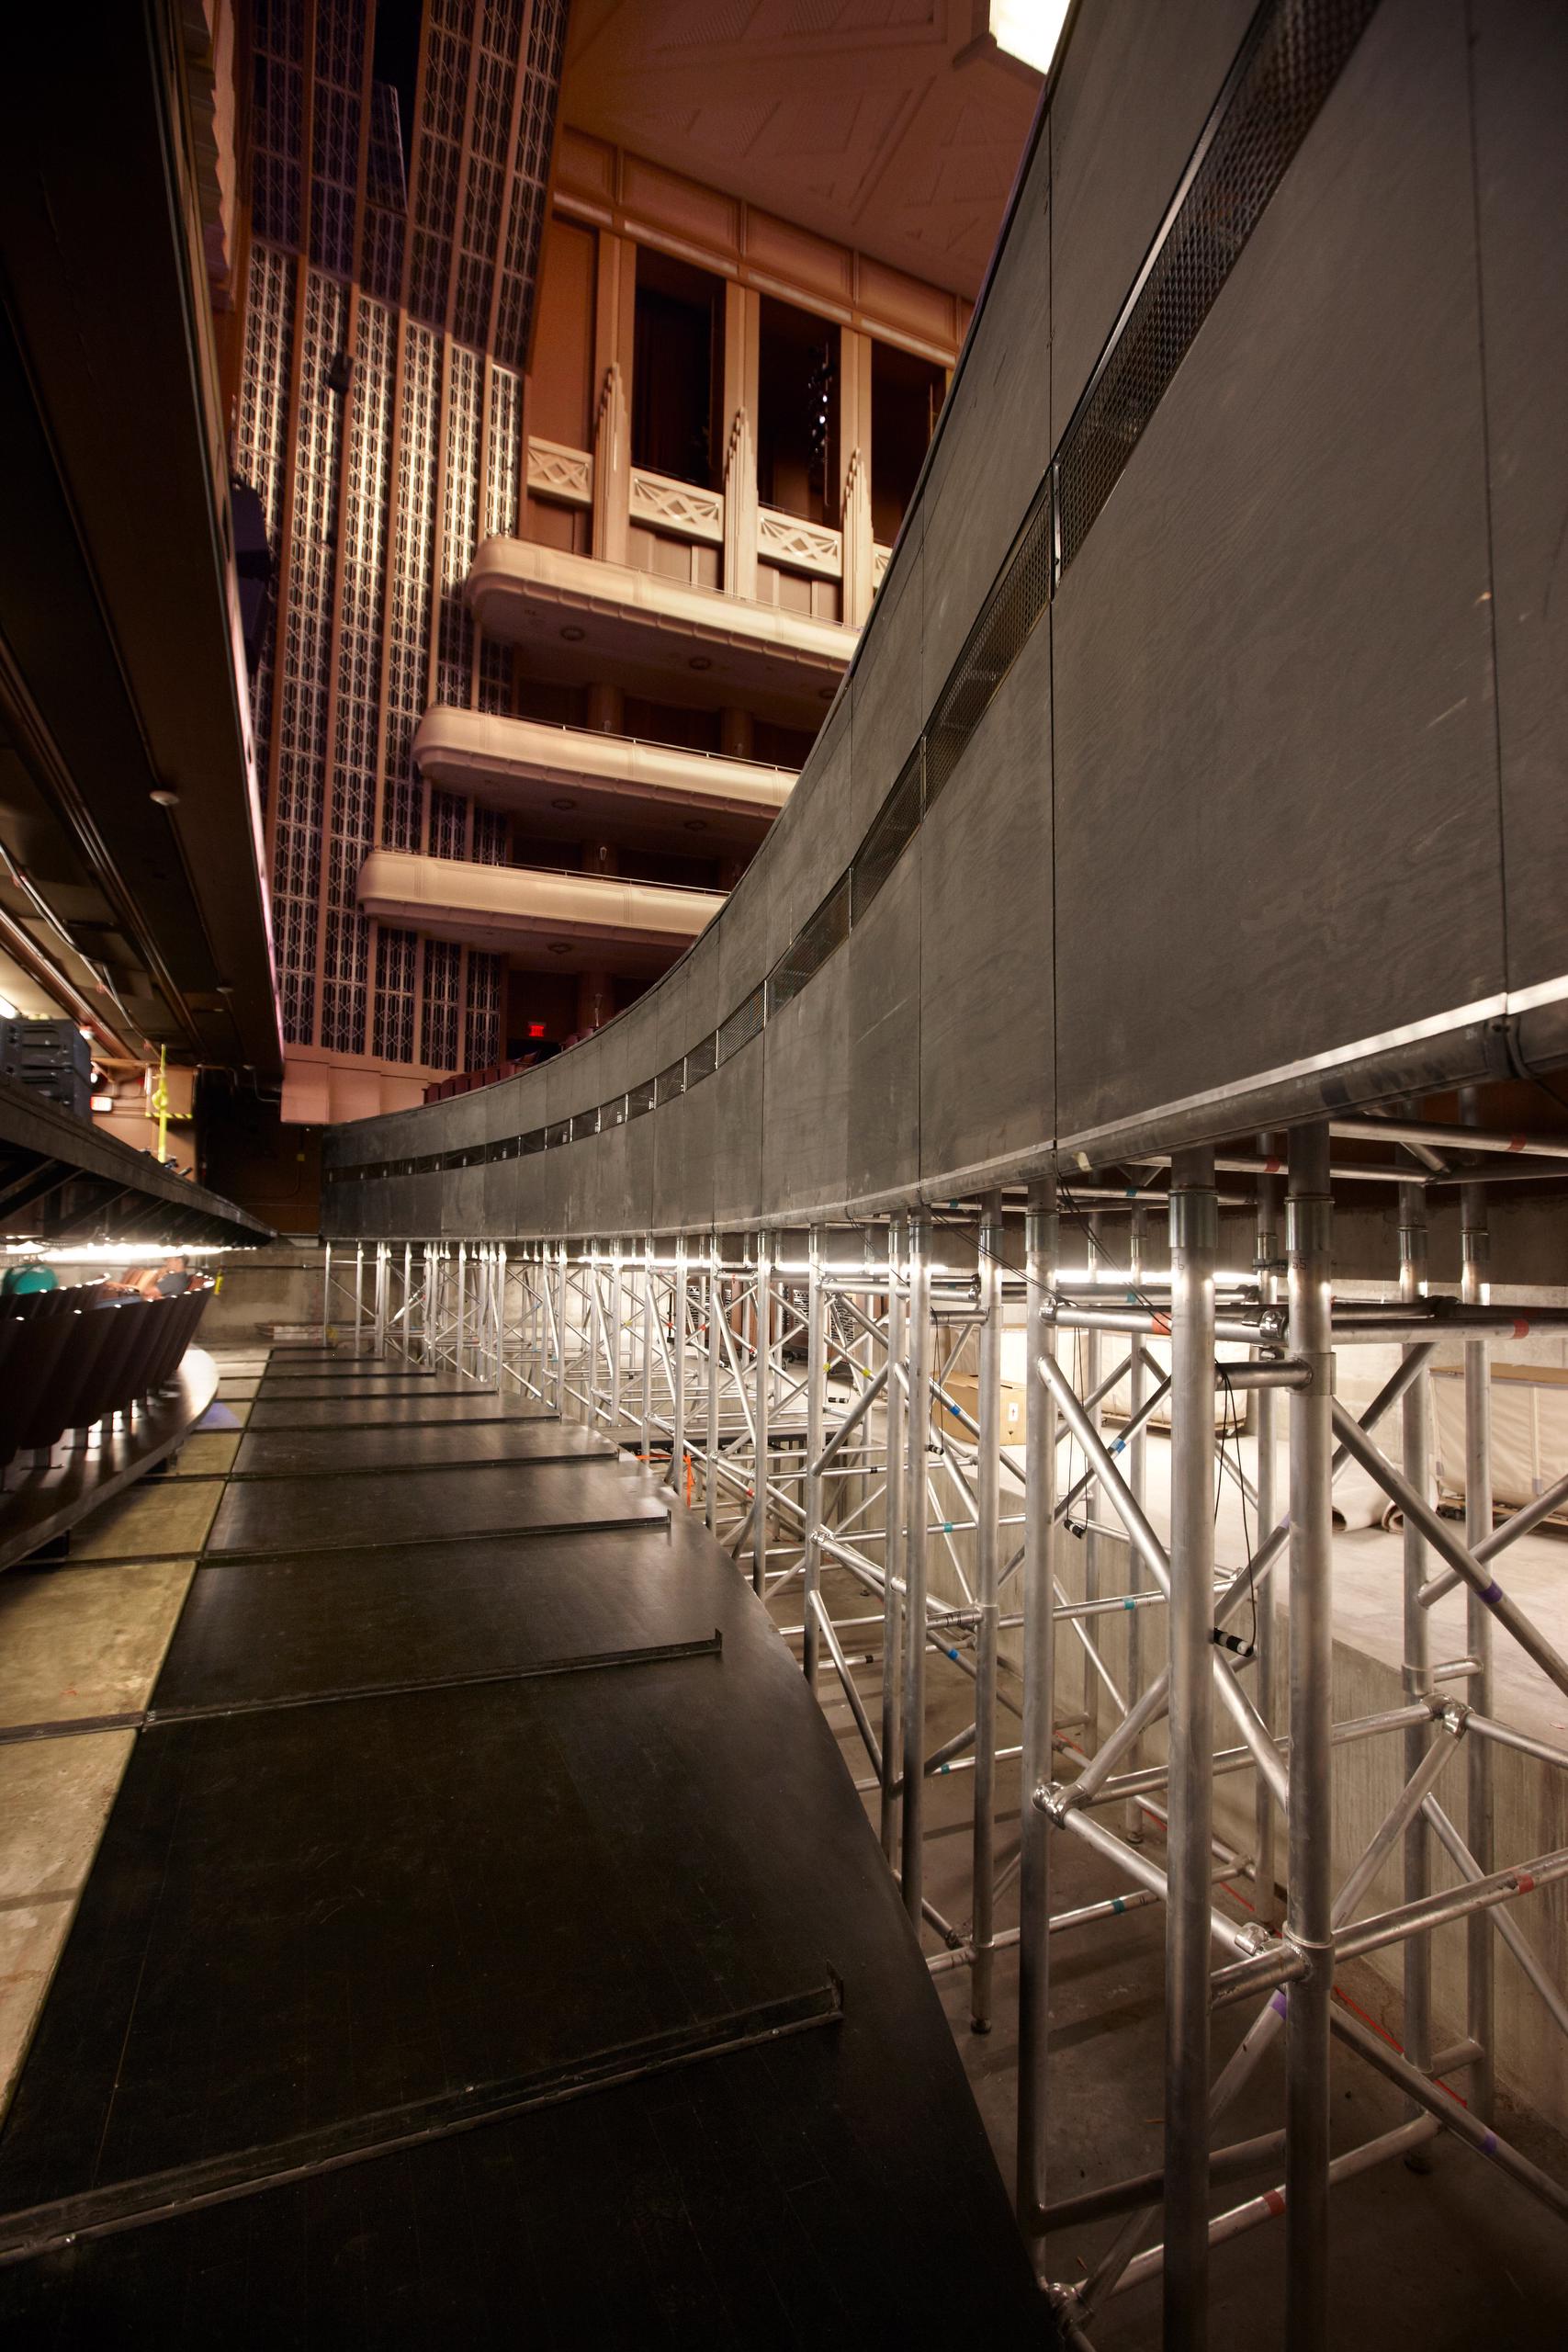 SMITH CENTER FOR THE PERFORMING ARTS - Project Image 4